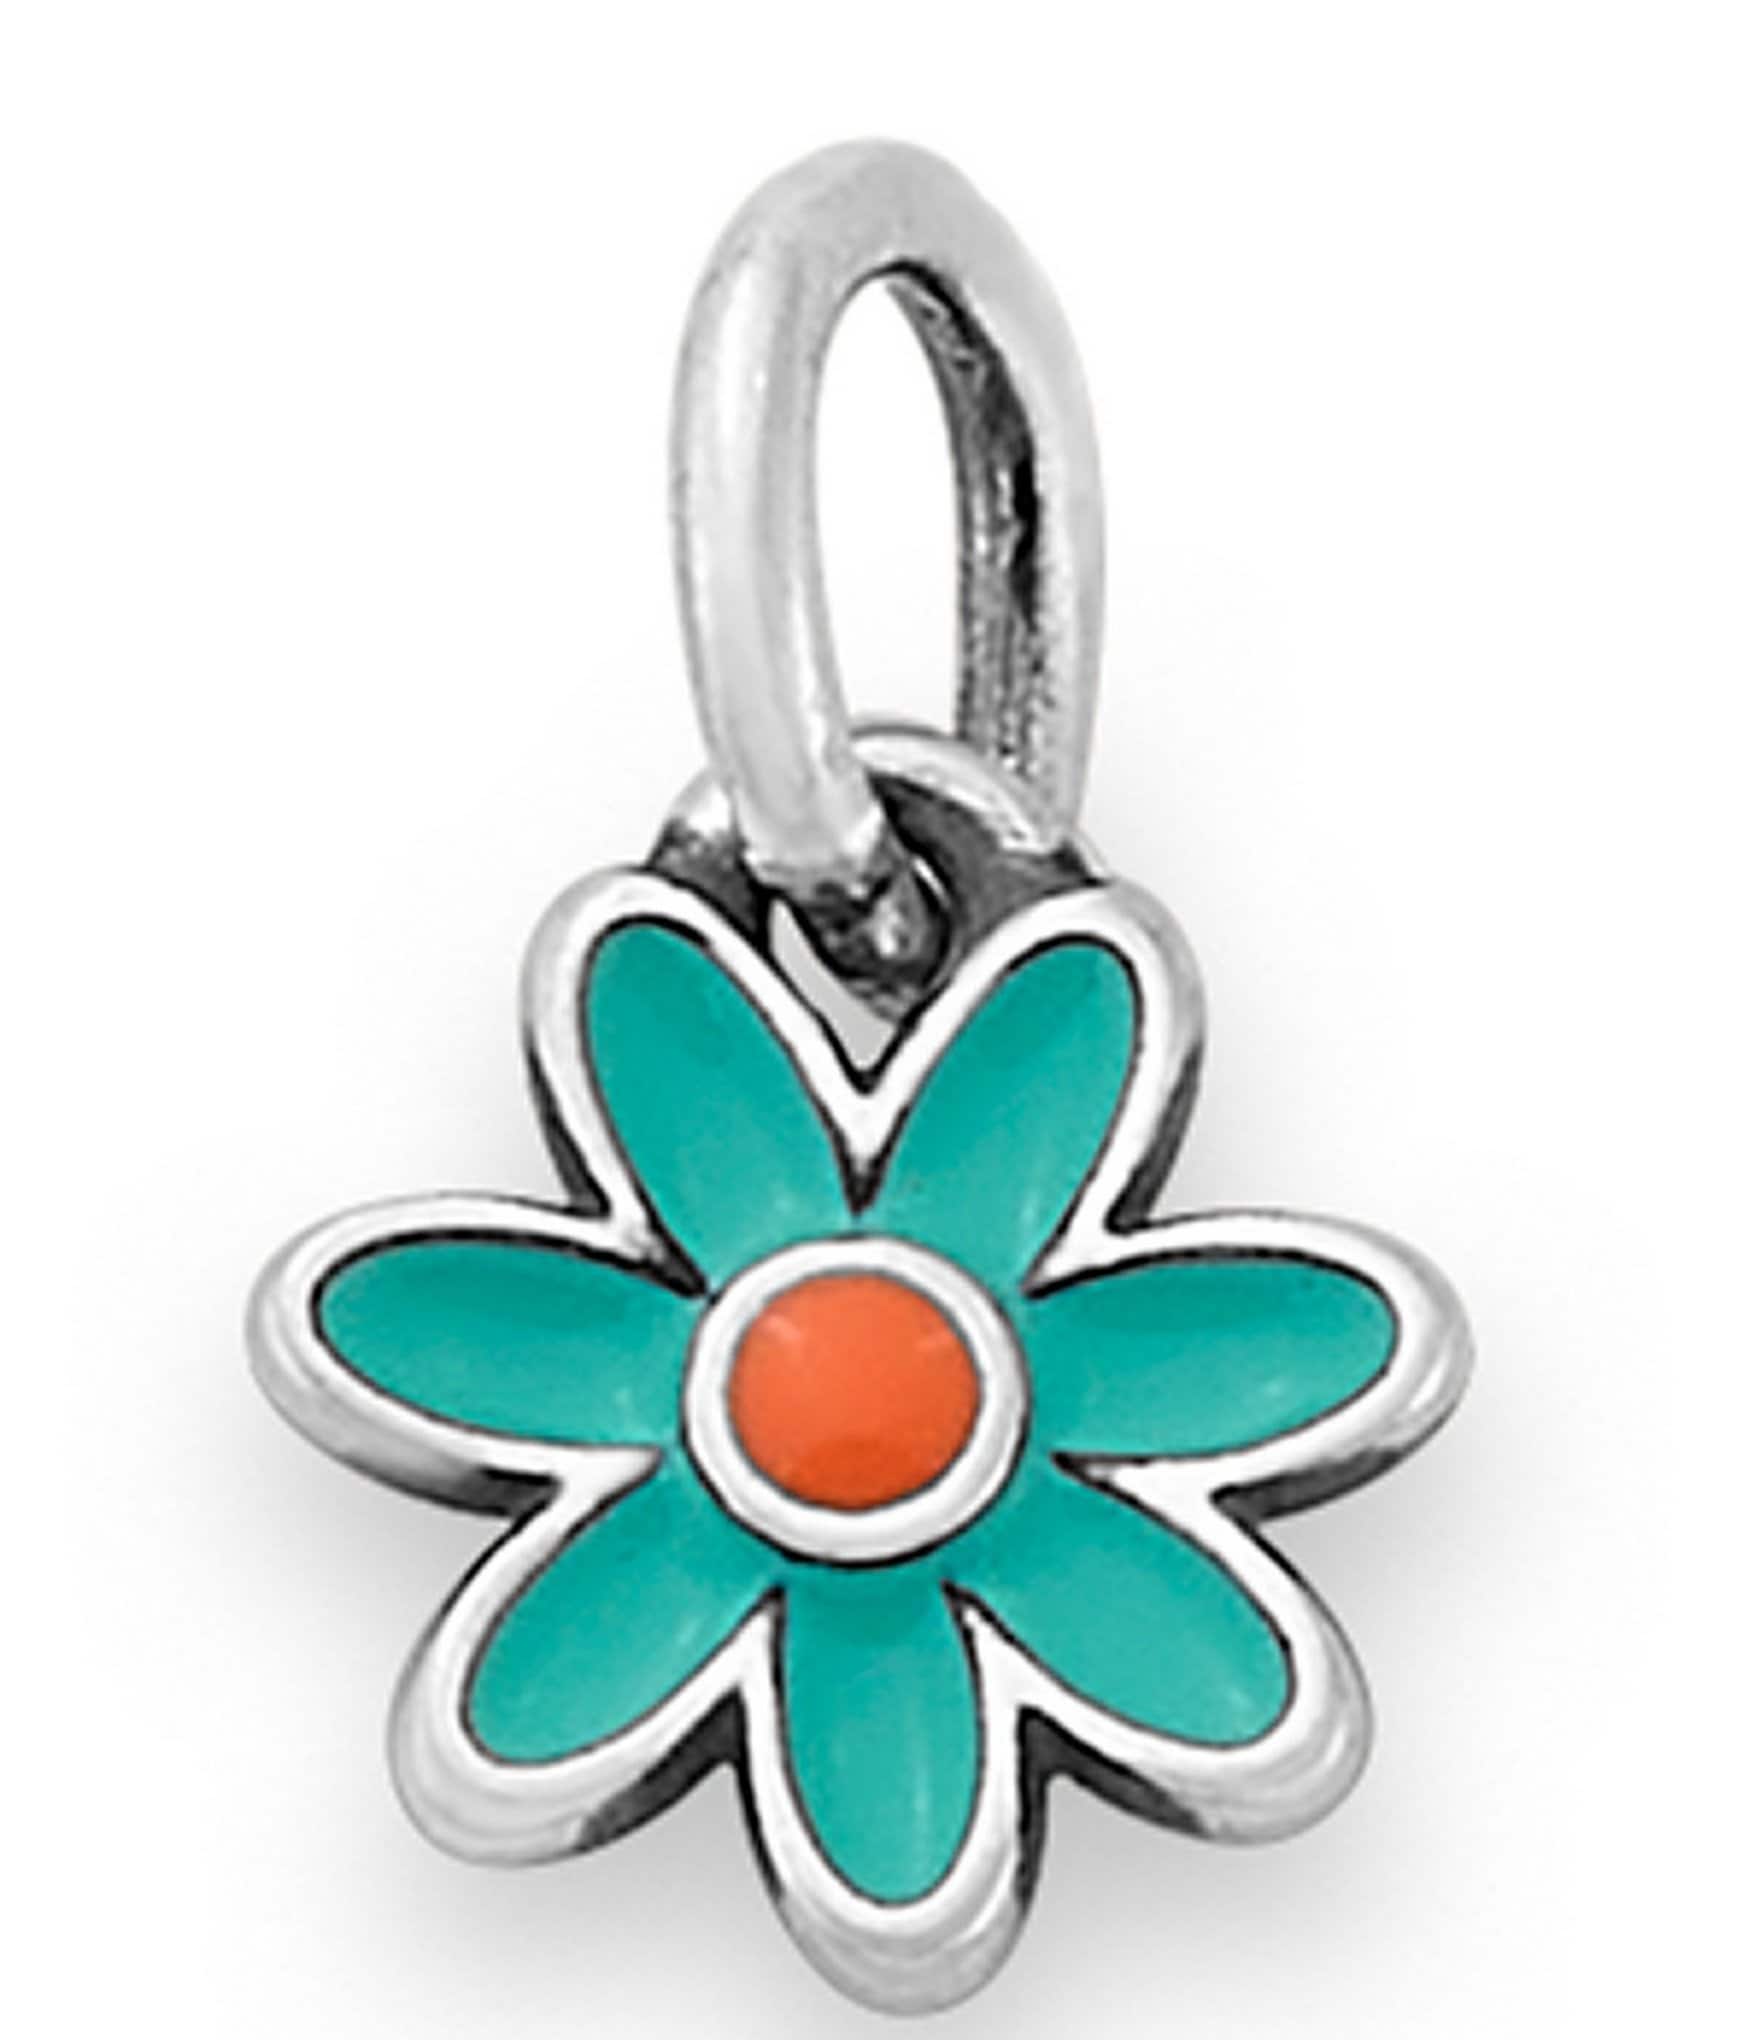 Buy Lilac Flower Enamel Charms Online. COD. Low Prices. Free Shipping.  Premium Quality